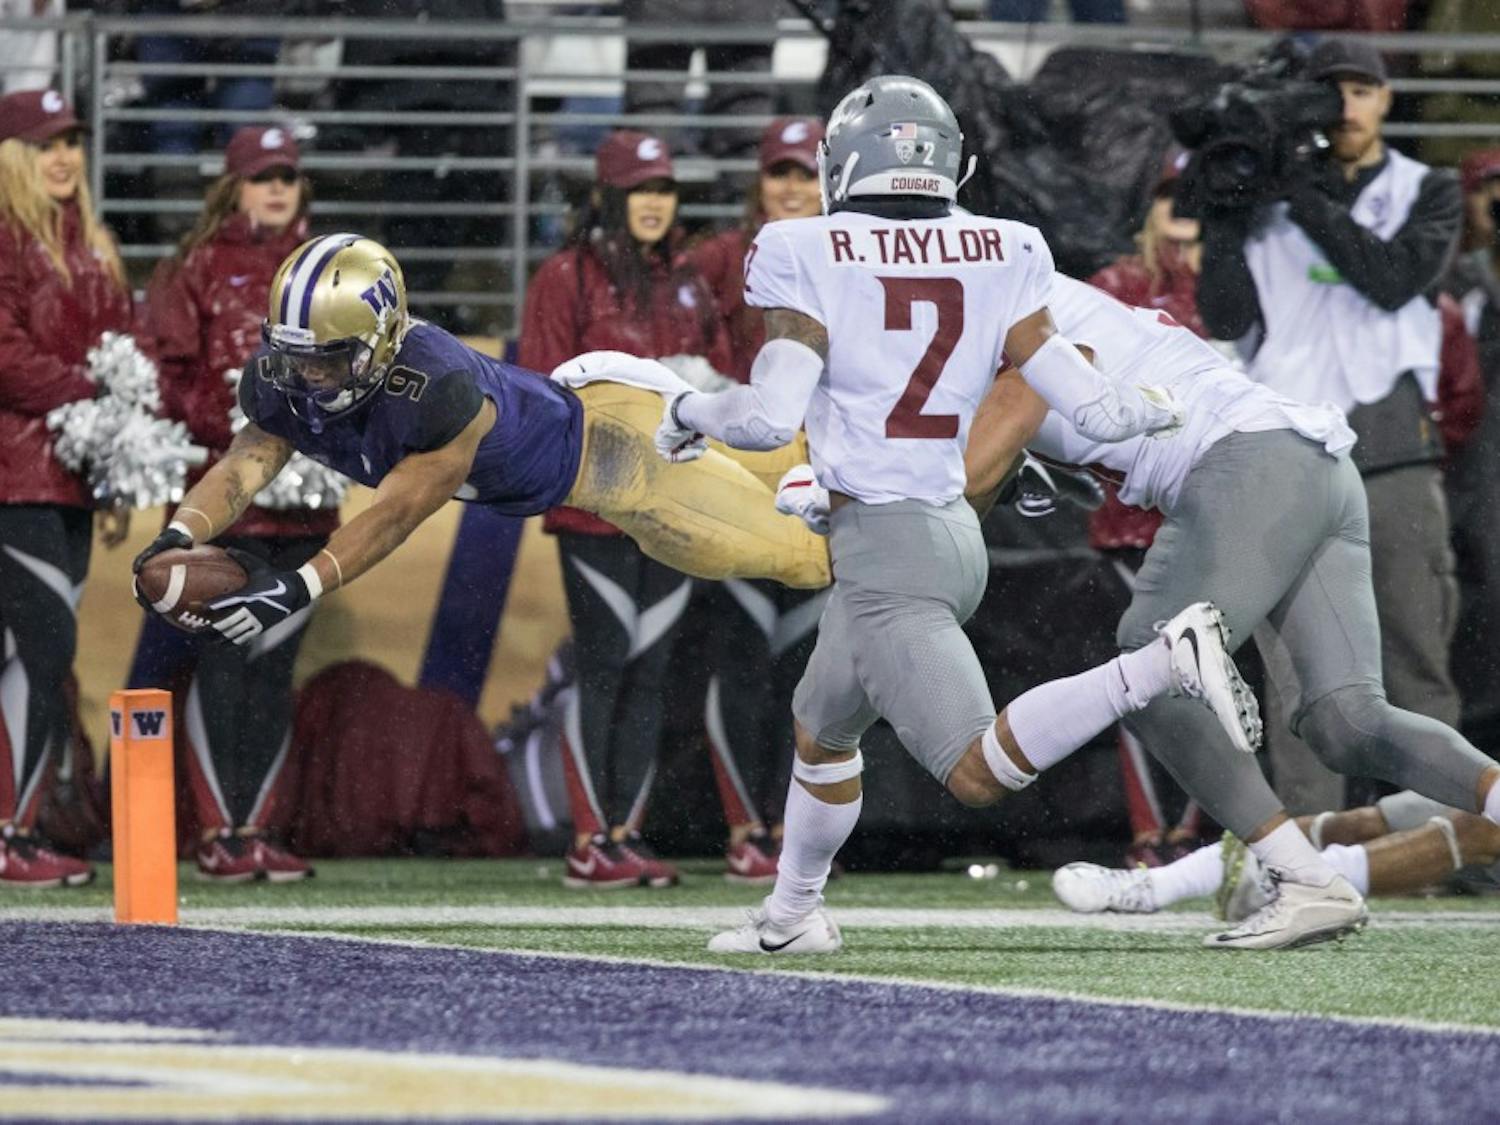 Washington running back Myles Gaskin (9) dives for the pylon to score his third touchdown of the game in the Huskies' 41-14 win over Washington State in the Apple Cup on Nov. 25, 2017, in Seattle, Washington. Contributed by the UW Daily sports desk.